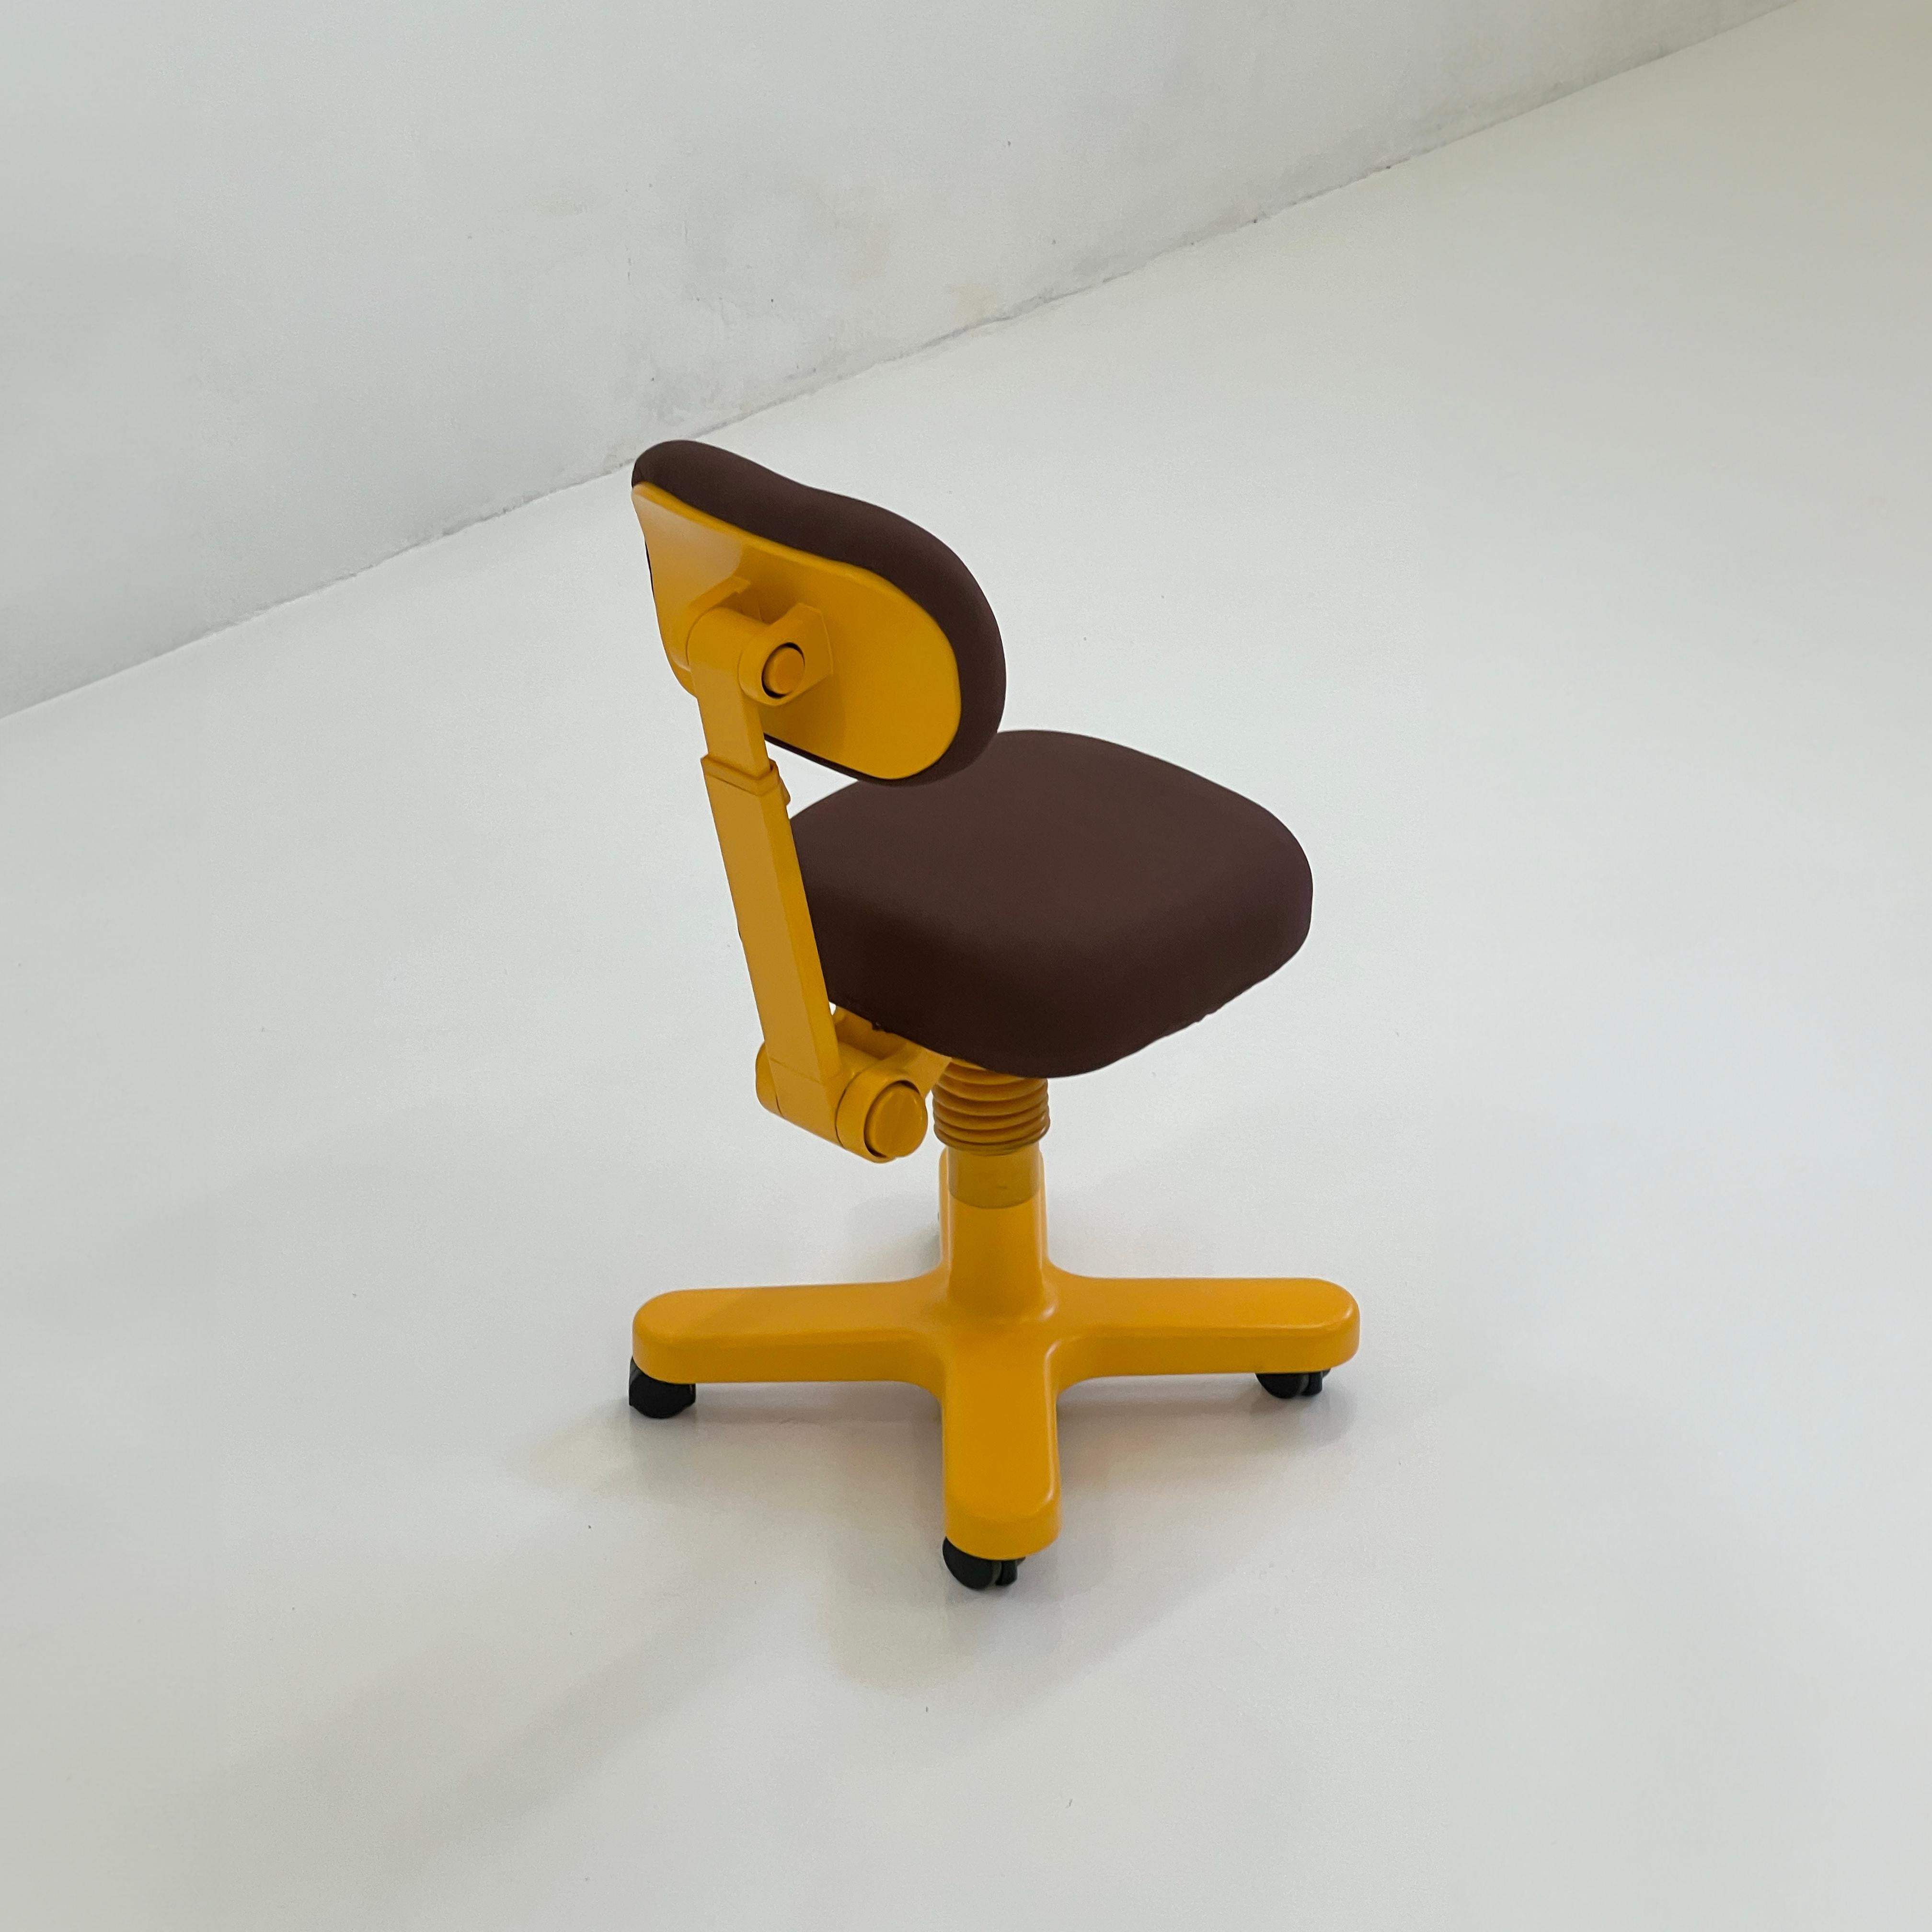  Desk Chair Mod.Synthesis 45 Designed by Ettore Sottsass for Olivetti, Italy 197 For Sale 6